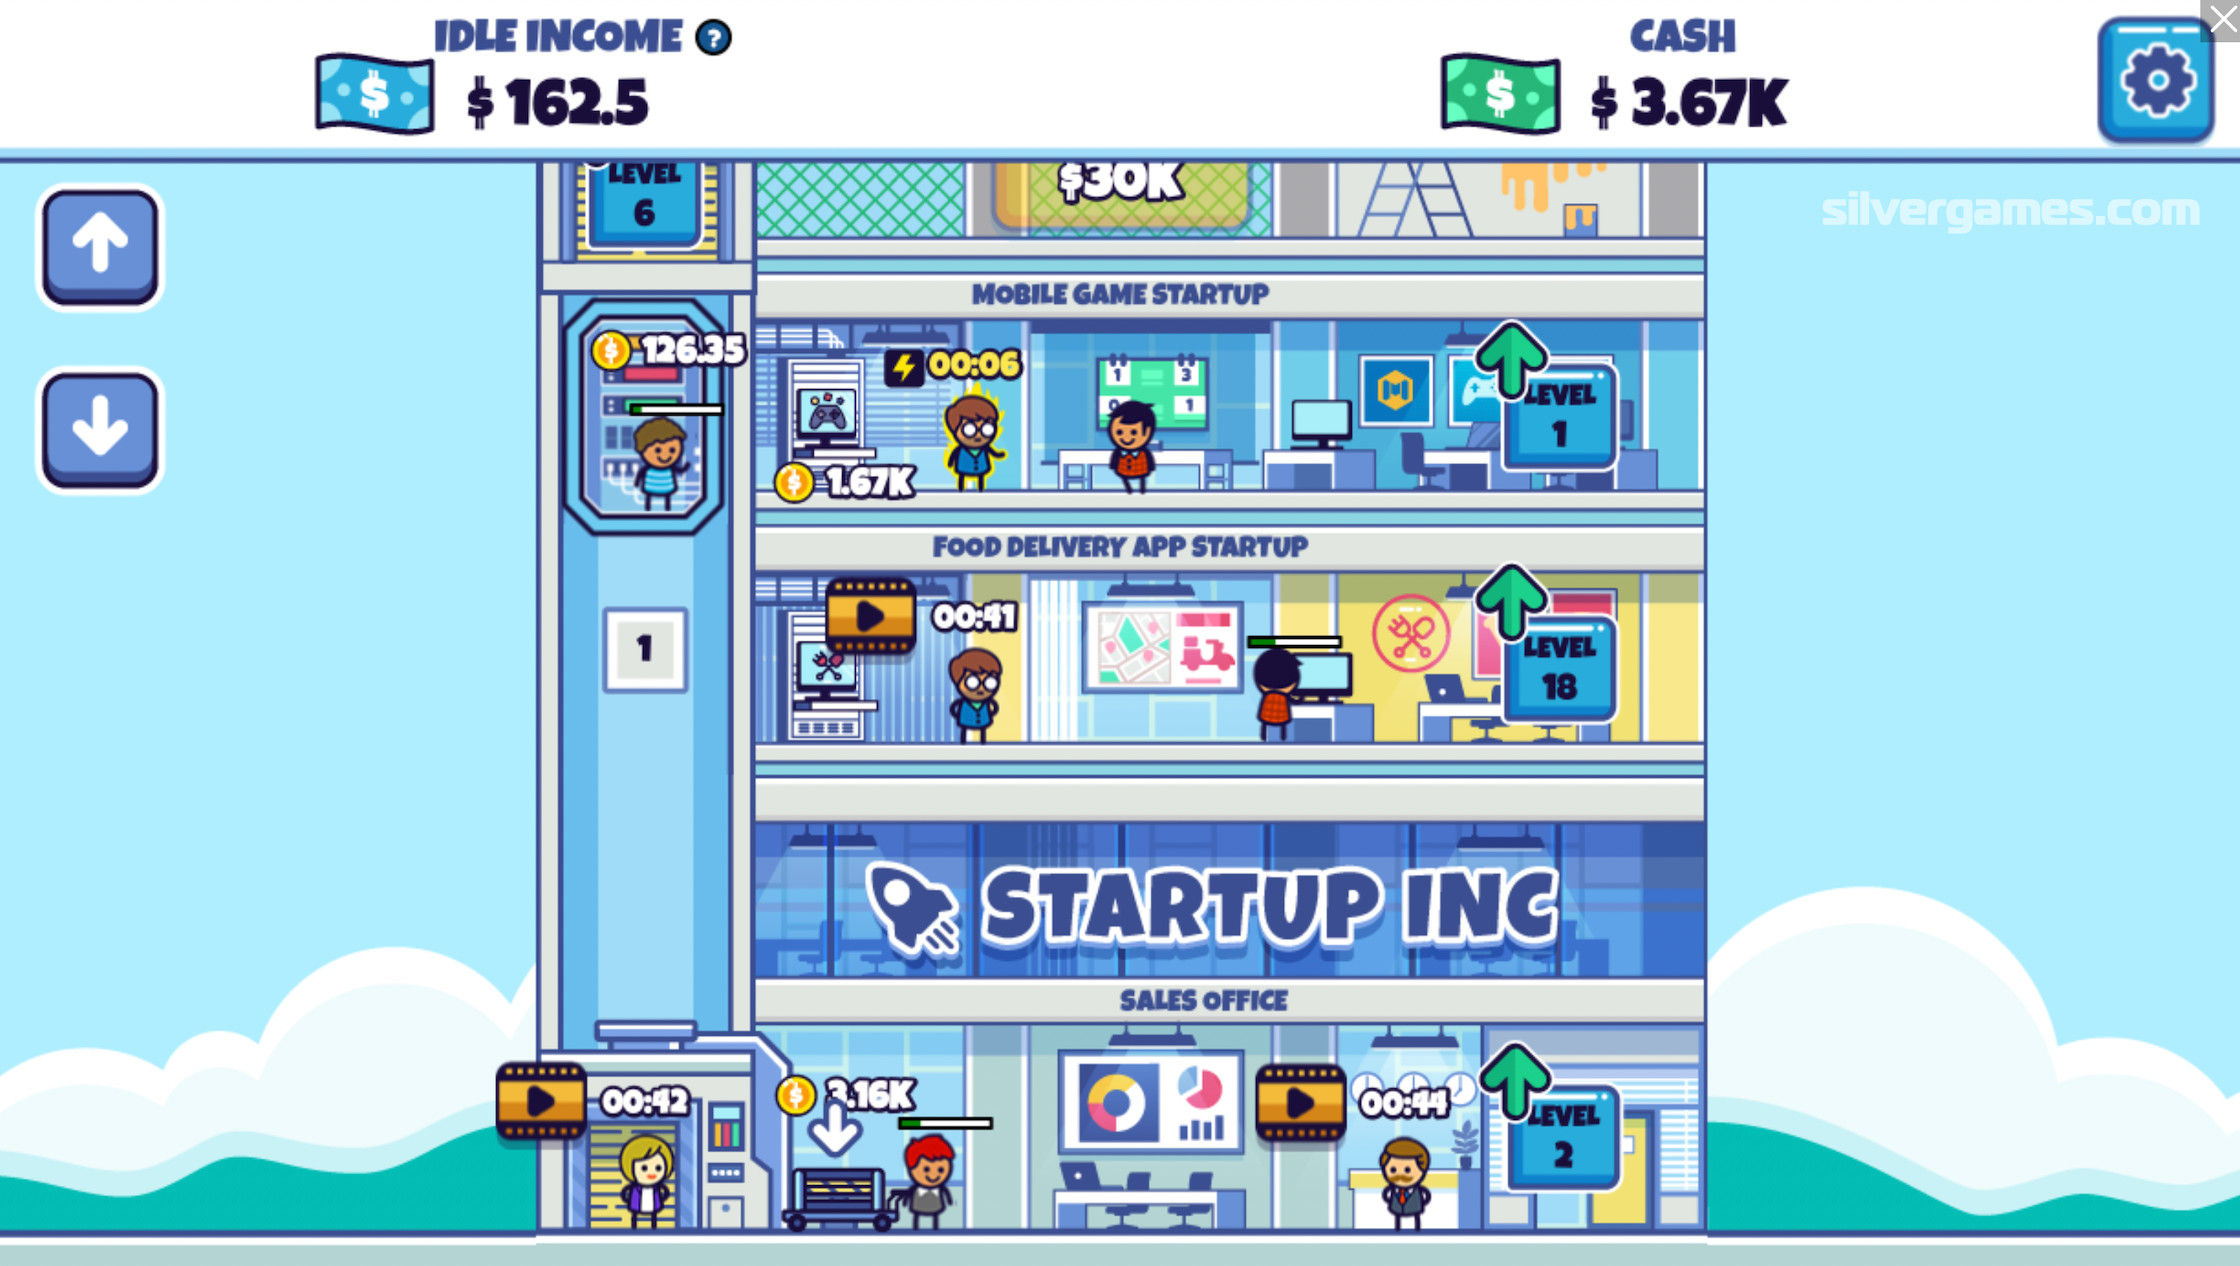 Idle Startup Tycoon - Jogue Online na Coolmath Games